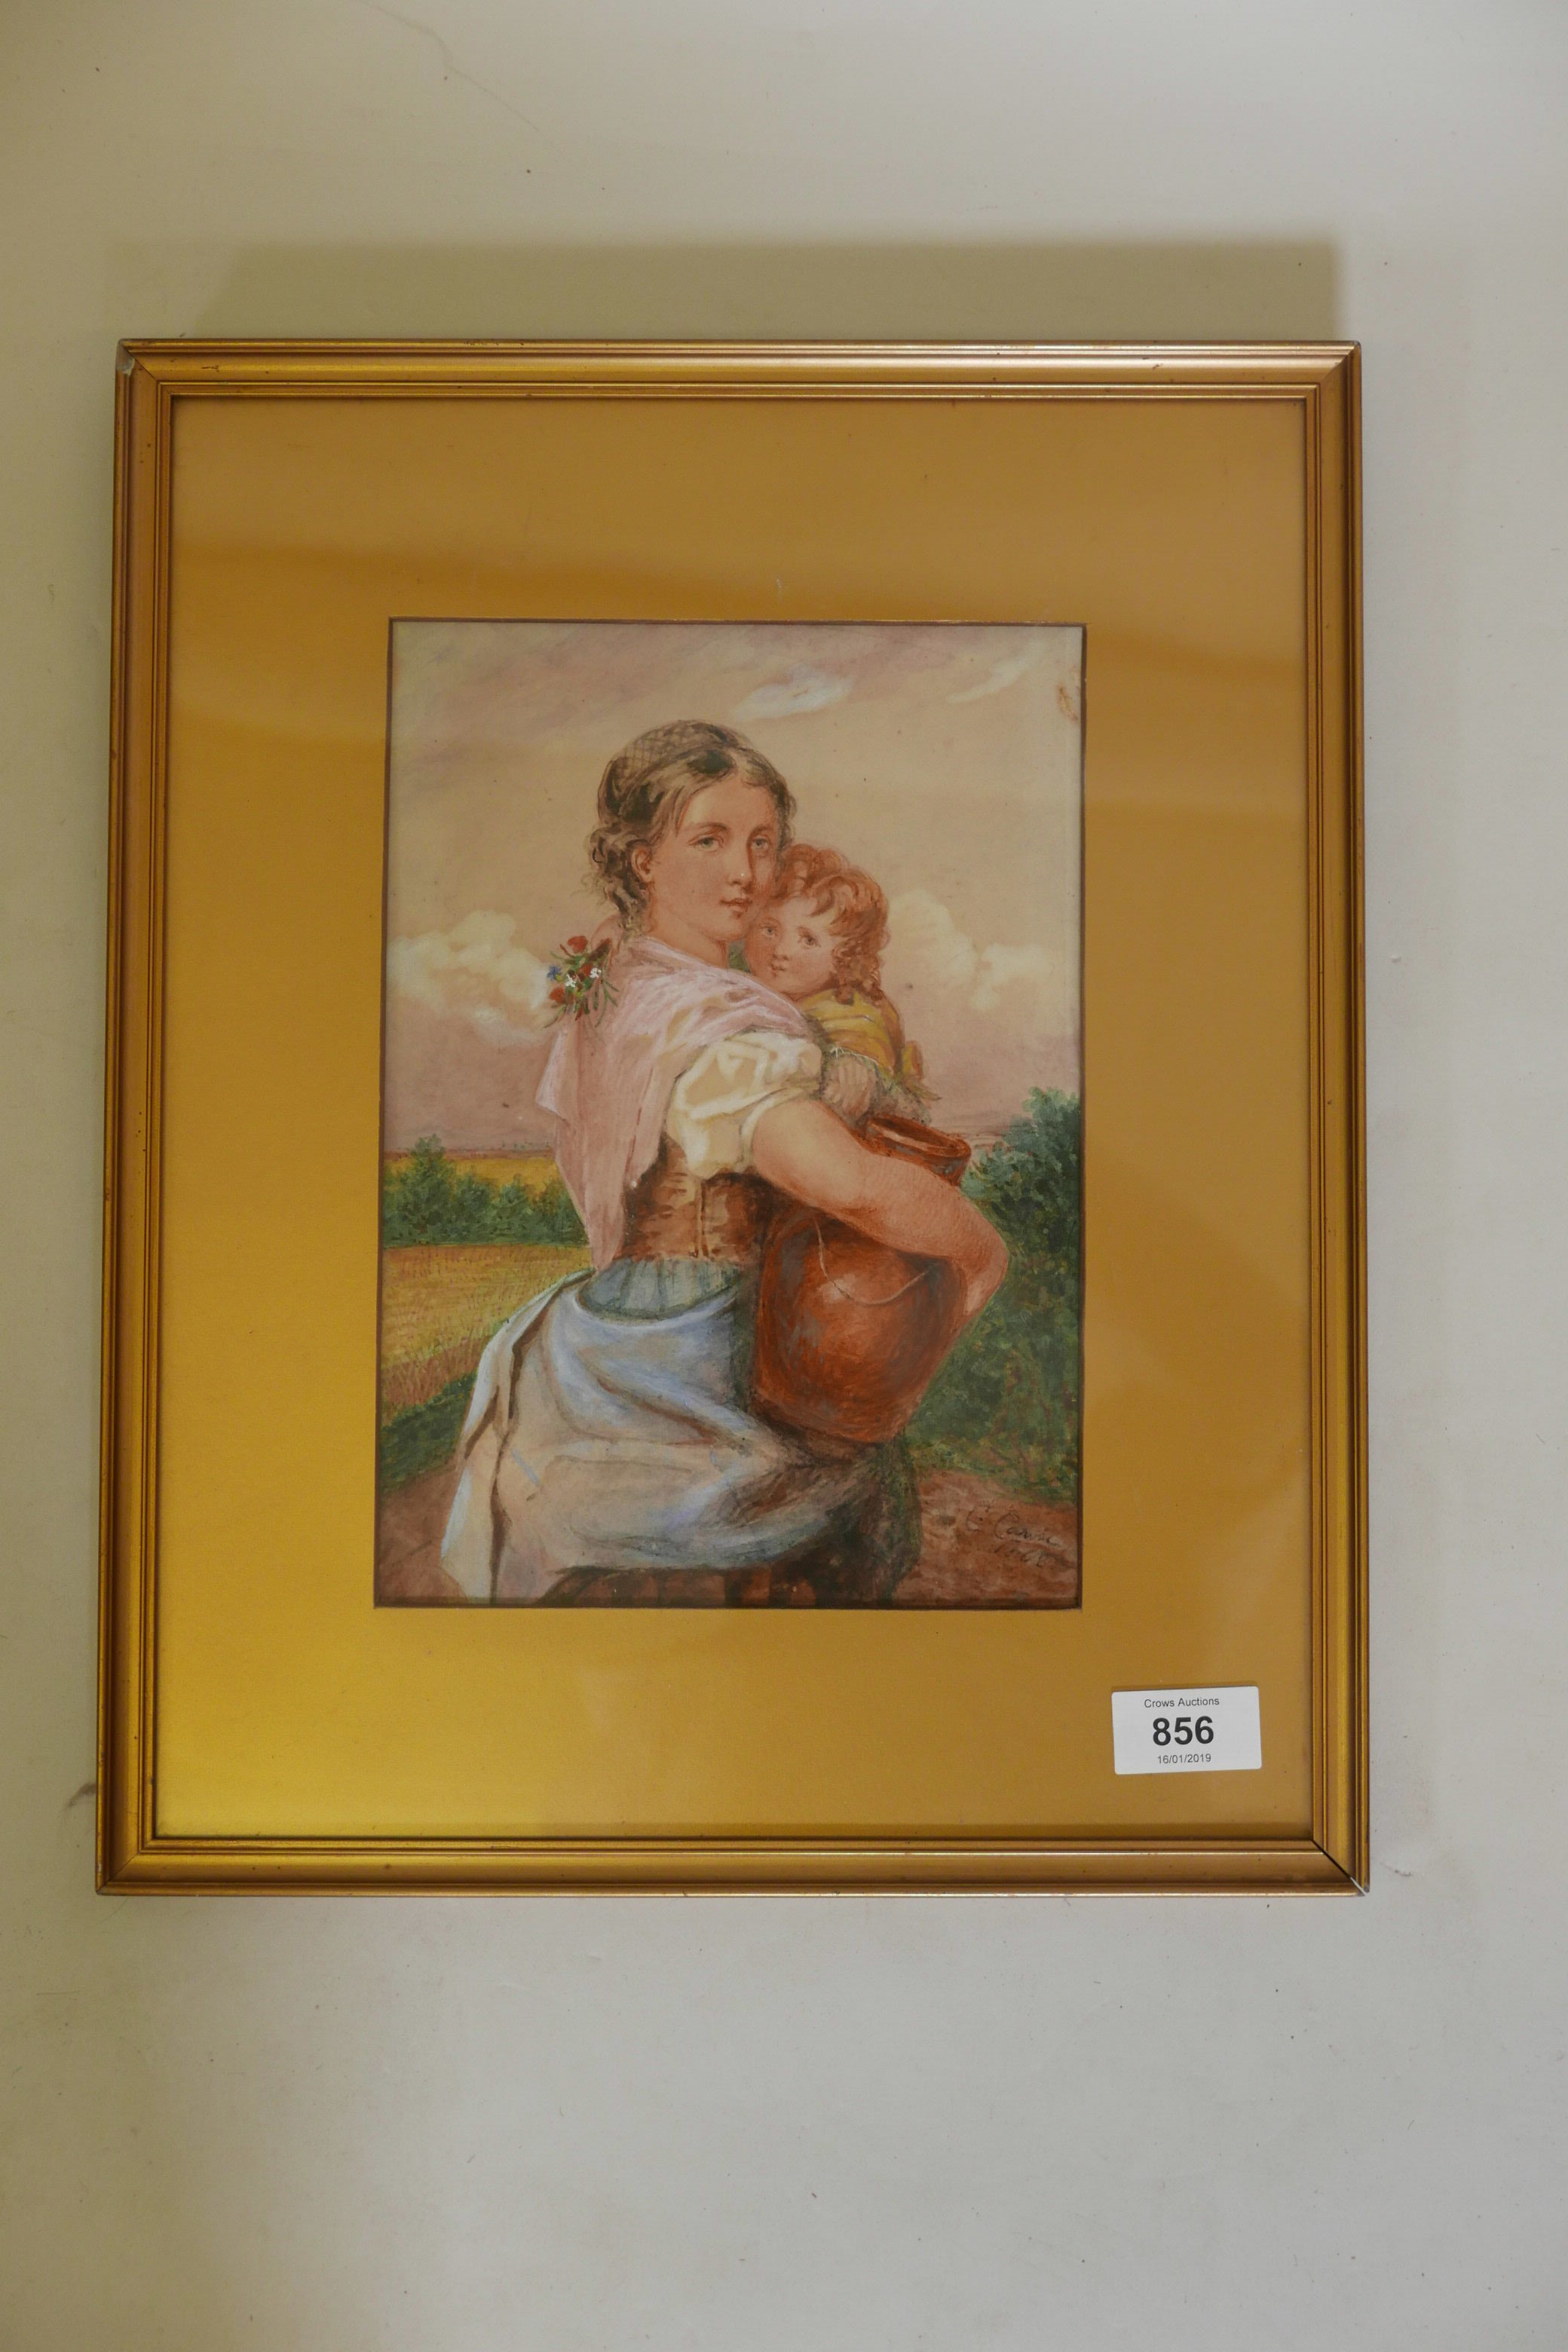 A C19th watercolour, young woman and child, signed indistinctly, C Cawis(?), 1868, 10" x 7" - Image 2 of 3